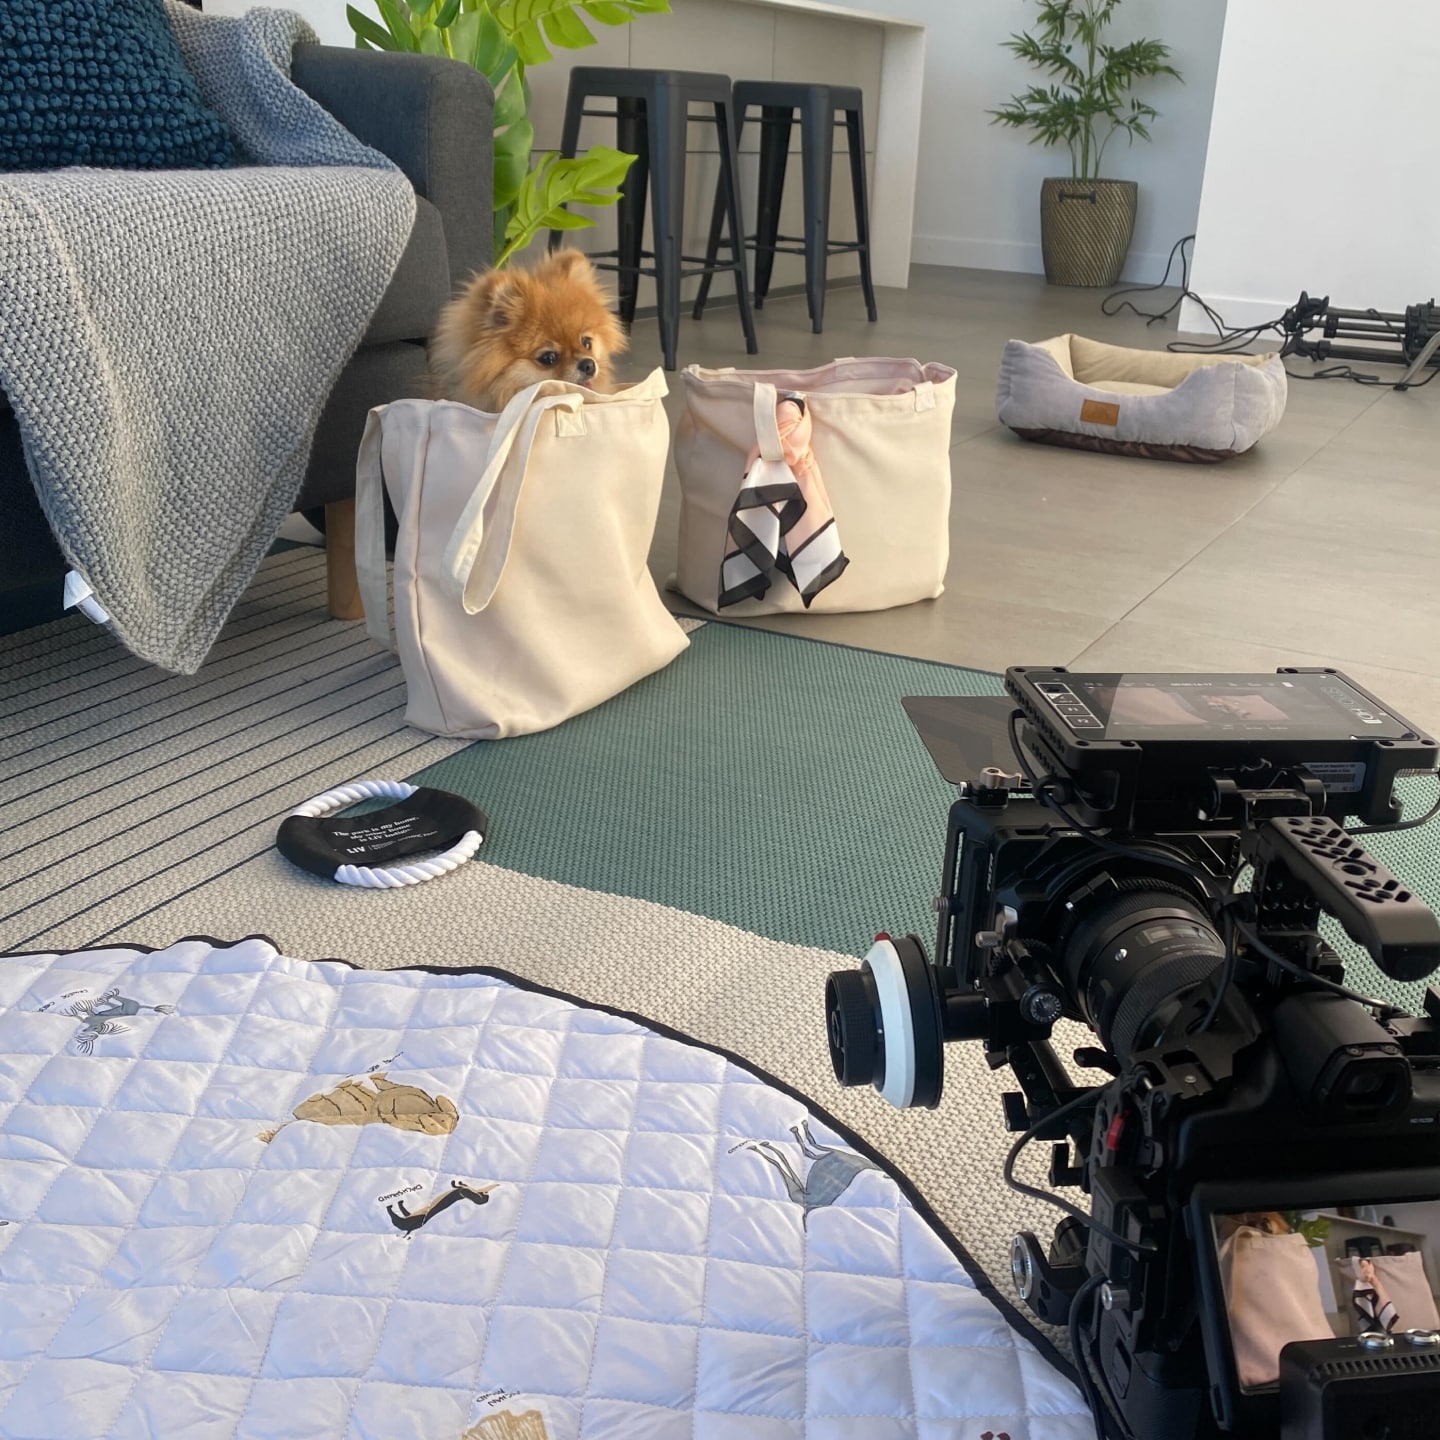 Puppy in a tote bag on set for the LIV Munro campaign video